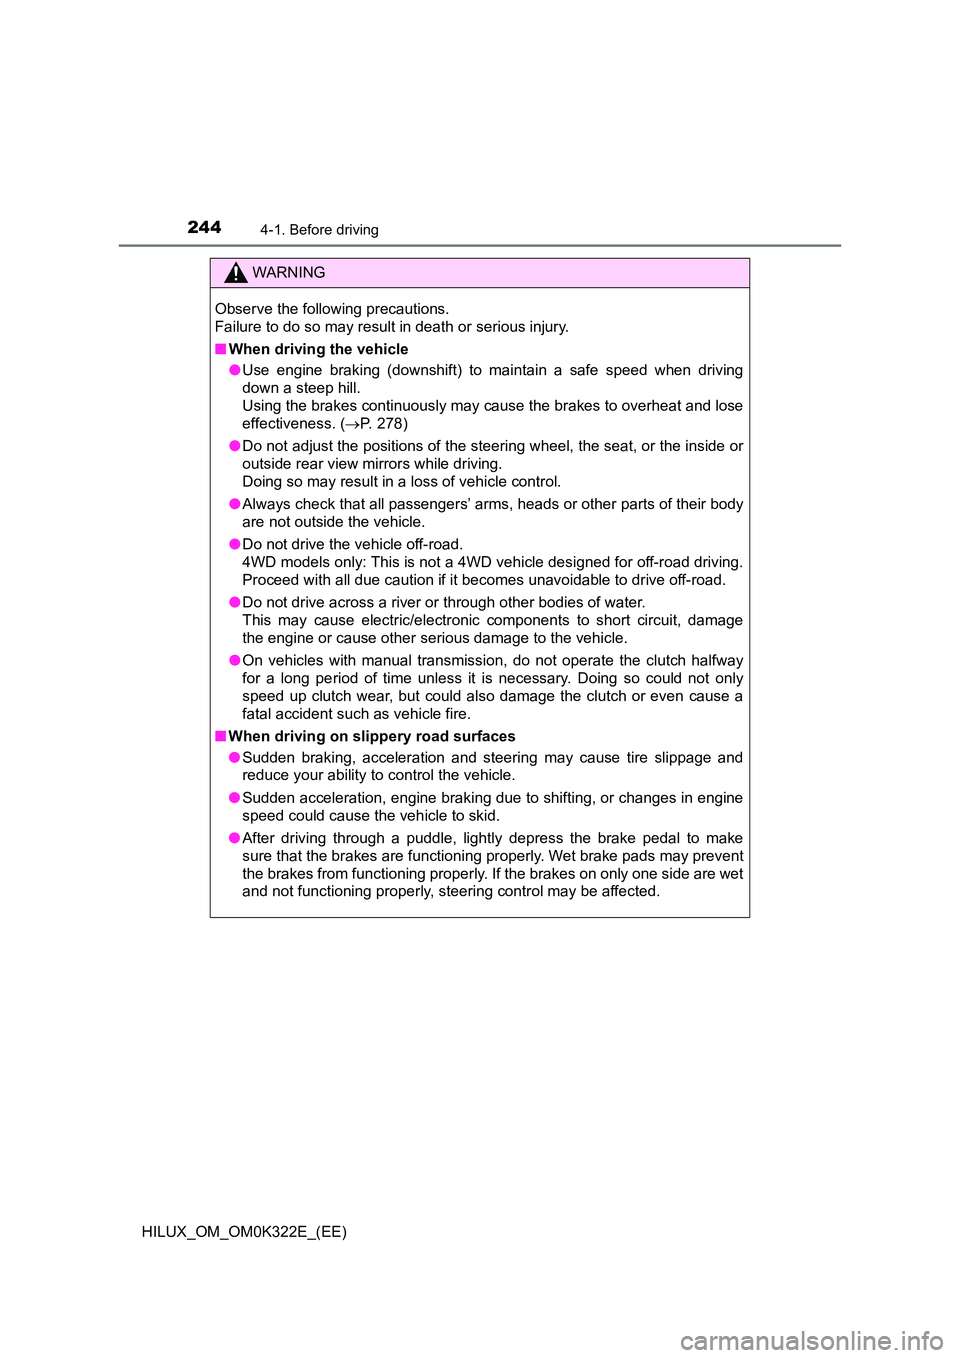 TOYOTA HILUX 2017  Owners Manual (in English) 2444-1. Before driving
HILUX_OM_OM0K322E_(EE)
WARNING
Observe the following precautions. 
Failure to do so may result in death or serious injury. 
■ When driving the vehicle 
● Use engine braking 